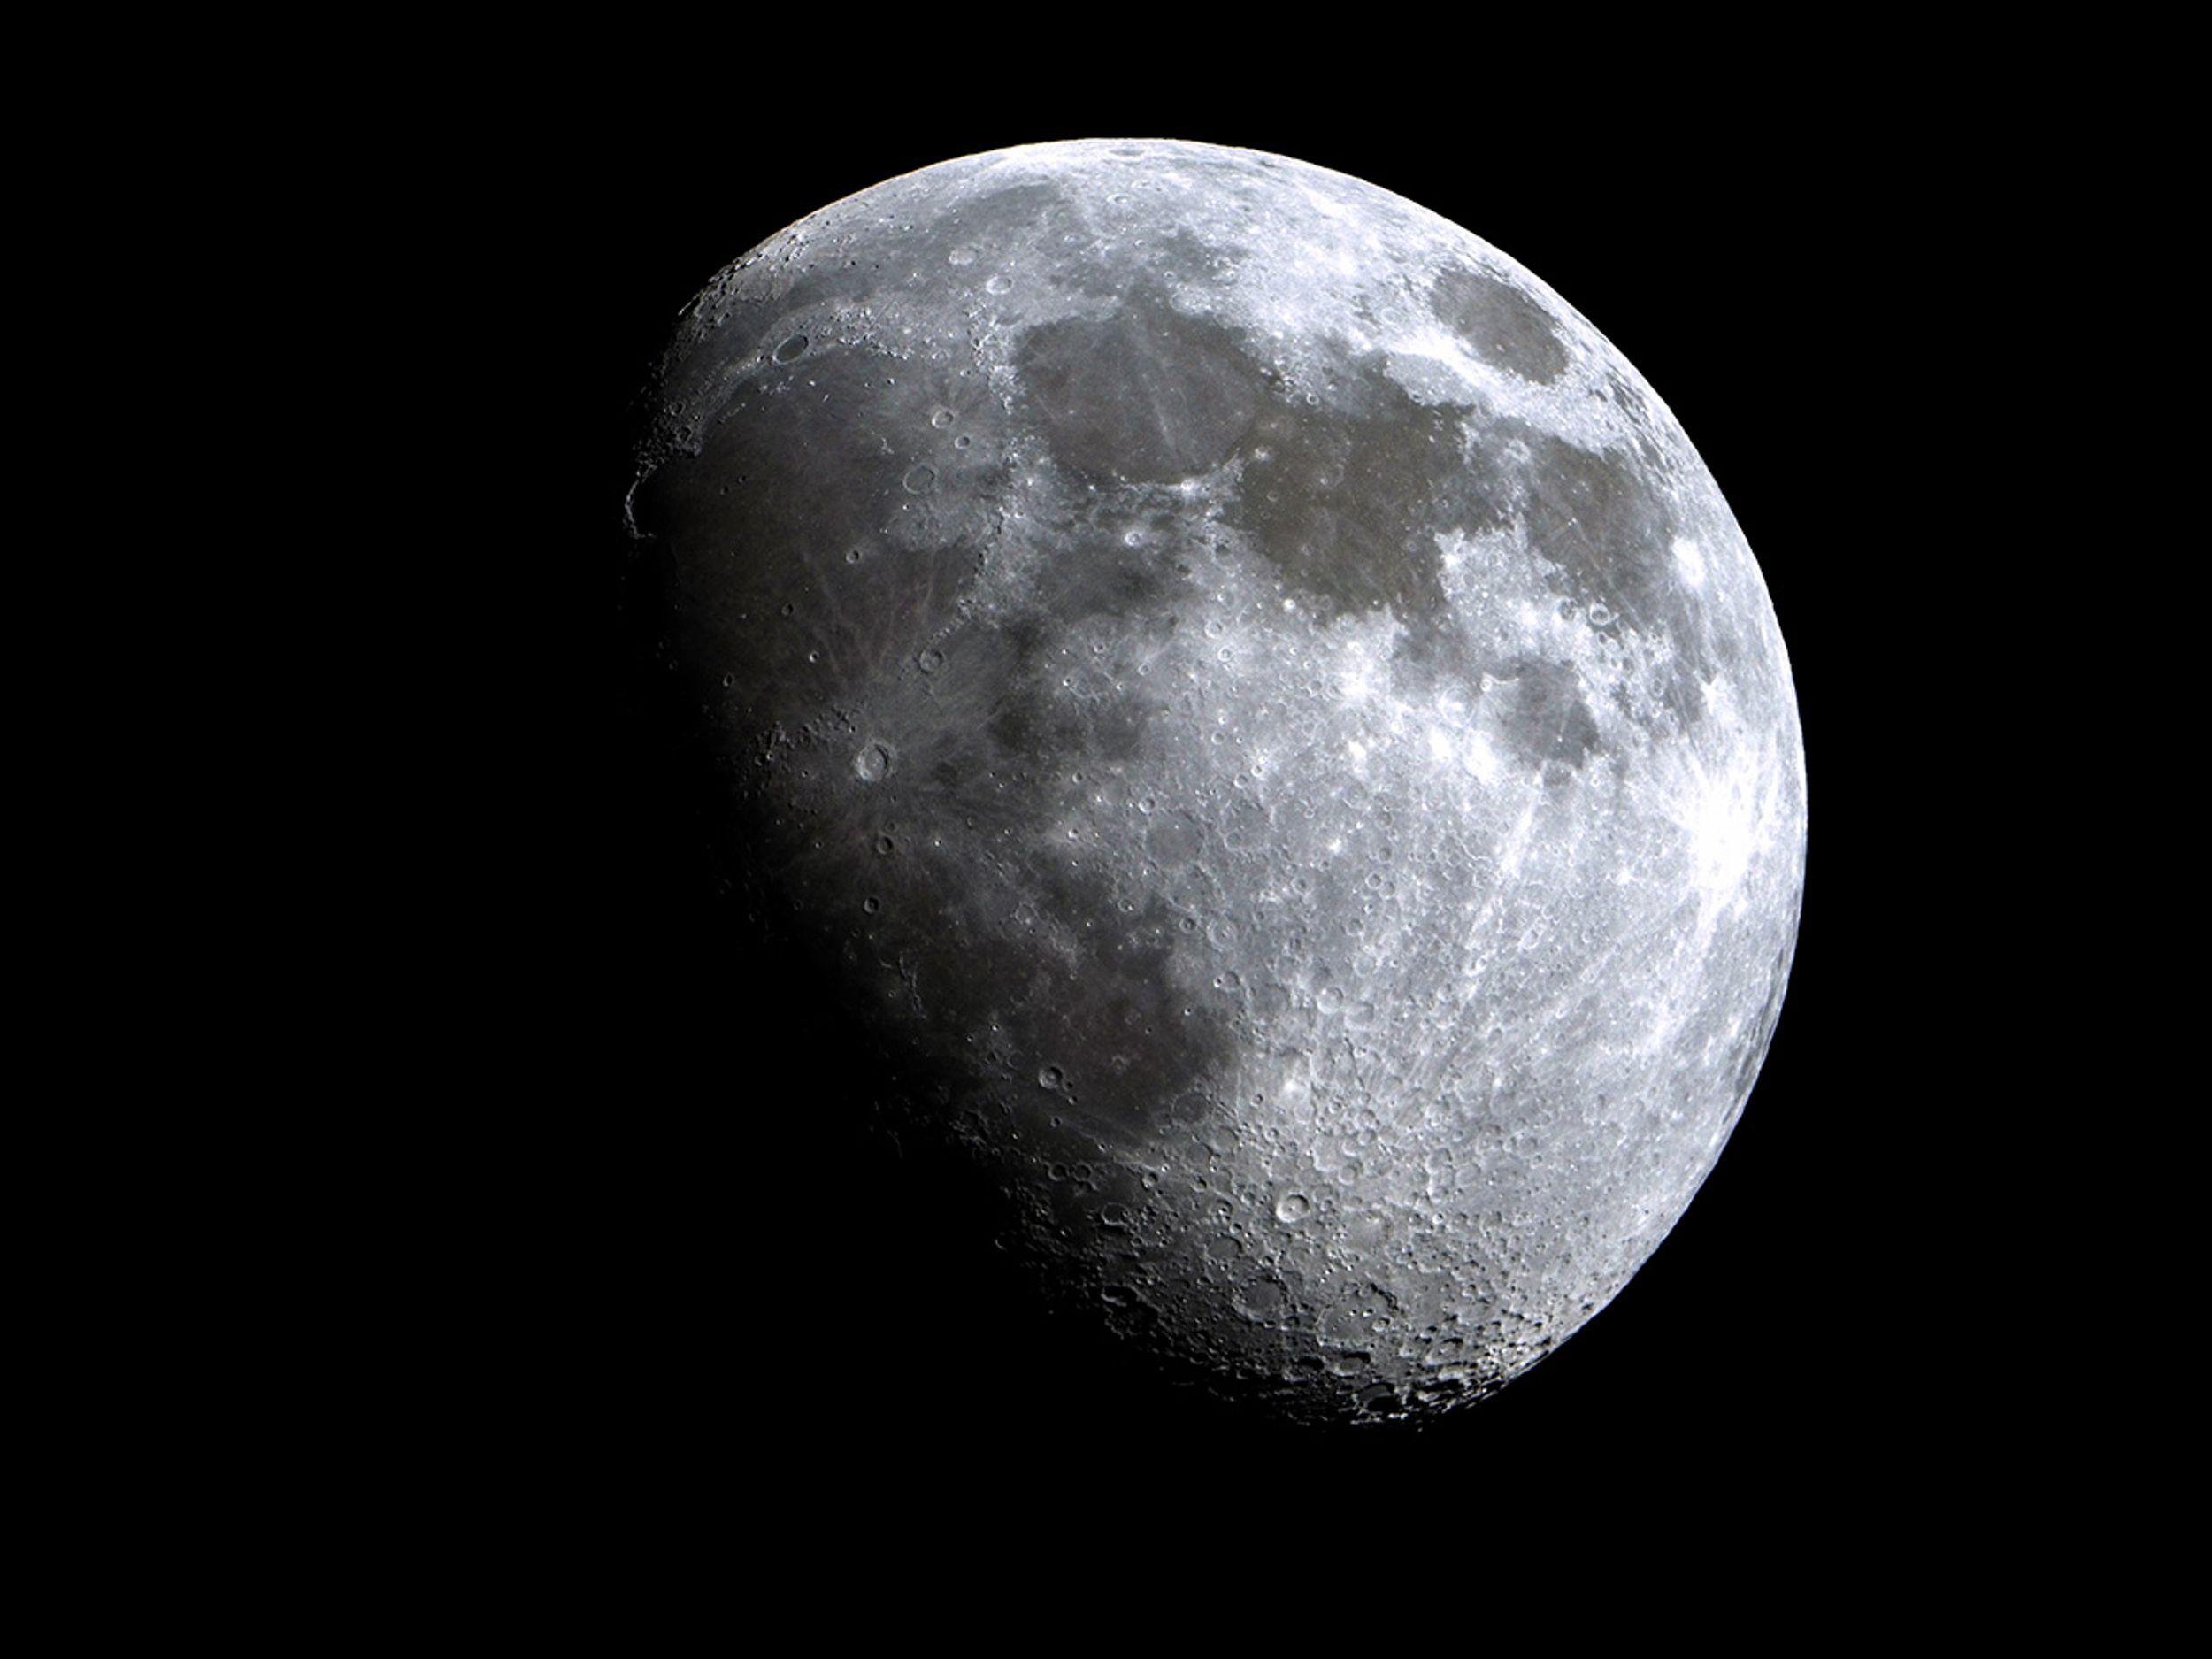 Photo of the moon by Alexander Rieber/EyeEm/Getty Images.